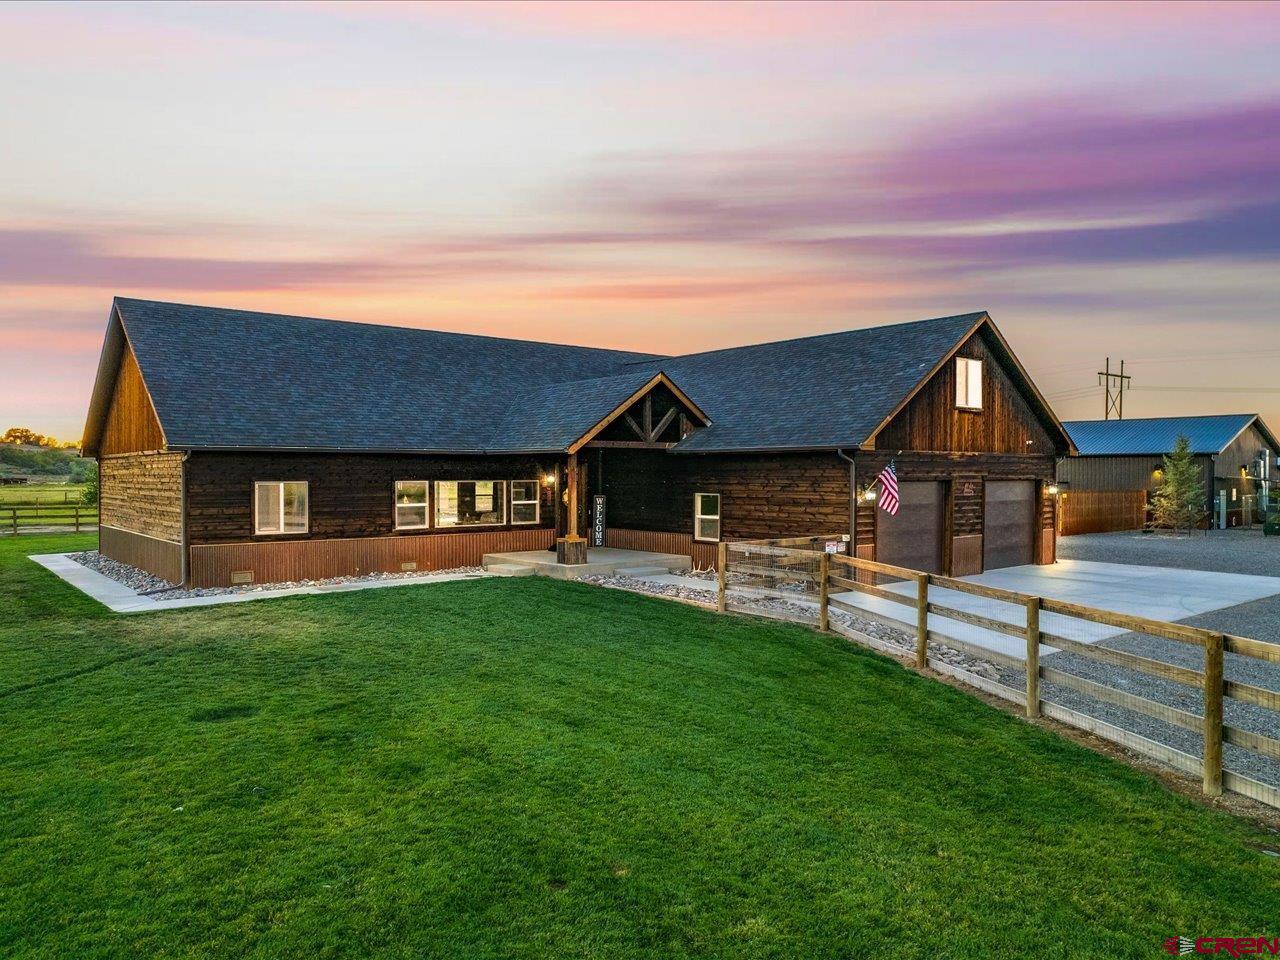 An exquisite home on 4.96 acres with views AND an established Dog Boarding Facility. An amazing opportunity to live and work all at the same  location. The Iron Will Dog Lodge was created in 2014 and has become one of the most elite Dog Boarding facilities on the Western Slope. Iron Will Dog Lodge is a very steady and Lucrative Turn Key Business, with the opportunity to double the size of the clientele with an additional 3200 S.F building already in place. The Real Property and the business are being Sold as a complete package, this includes a beautiful custom home with 2872 S.F, 3 bed, office,  2 baths, bonus room above the 2 car garage, vaulted ceilings, 8' stained alder interior doors,  mountain views and so much more. The Kennel 1800S.F and the detached garage/Shop has 3200 S.F with an RV Bay, additional 2+ car parking area and endless possibilities.